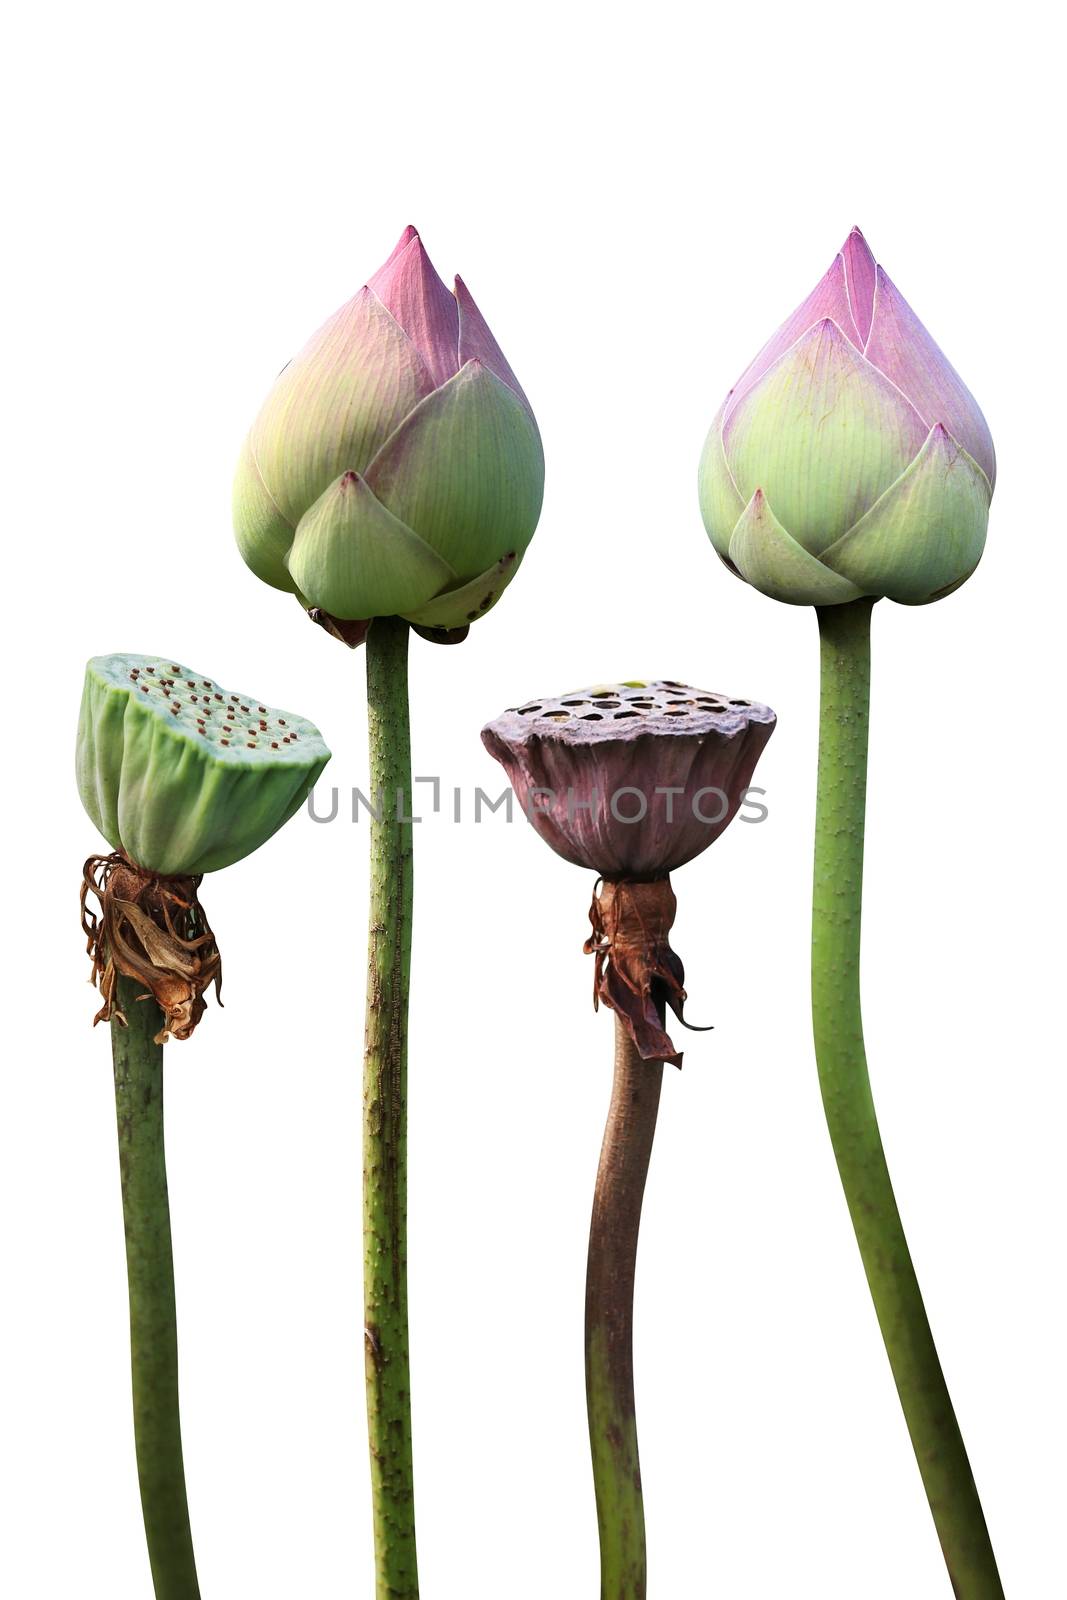 lily pad and lotus bud isolated on white background